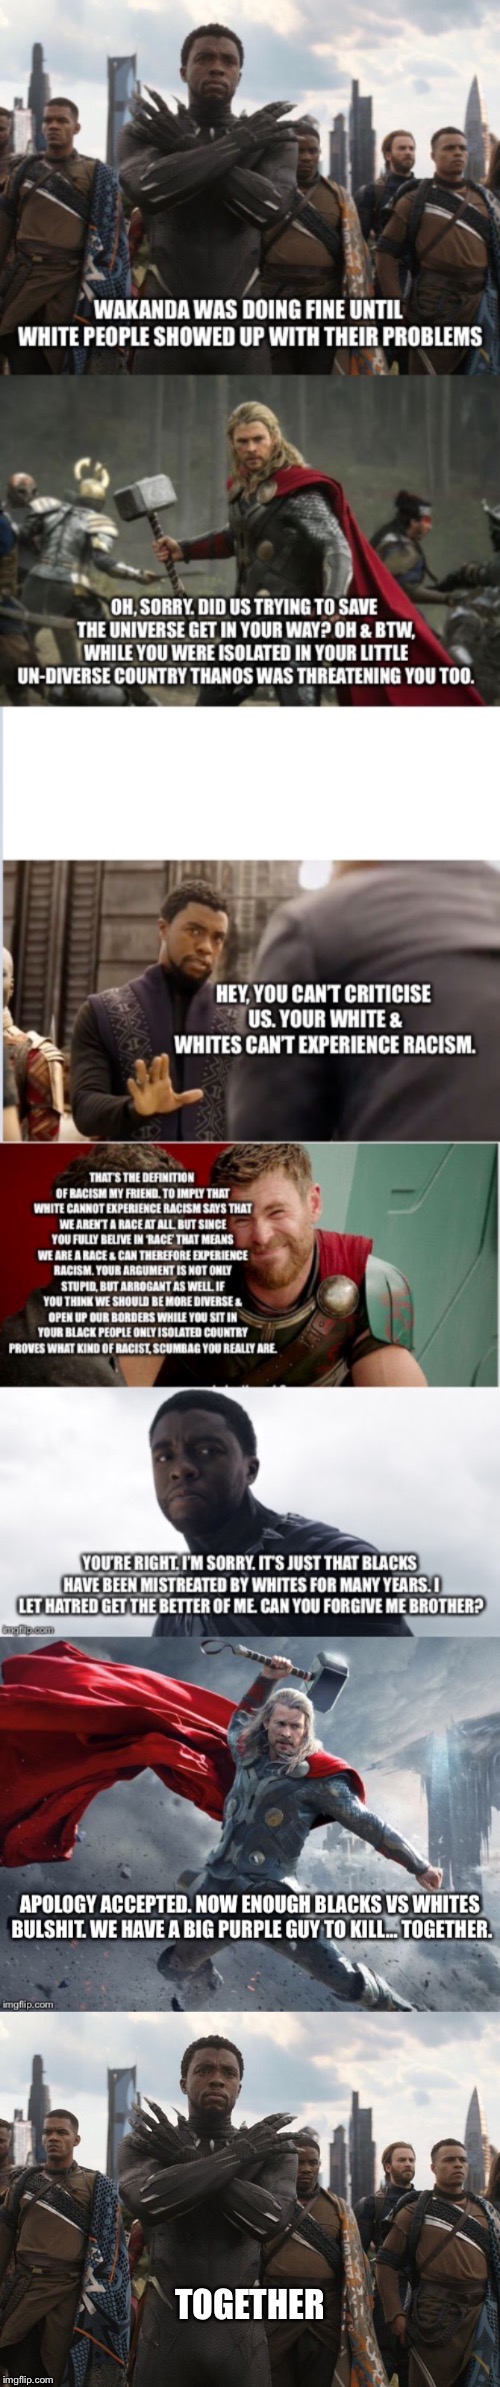 TOGETHER | image tagged in wakanda forever,diversity,white people,black lives matter,no racism | made w/ Imgflip meme maker